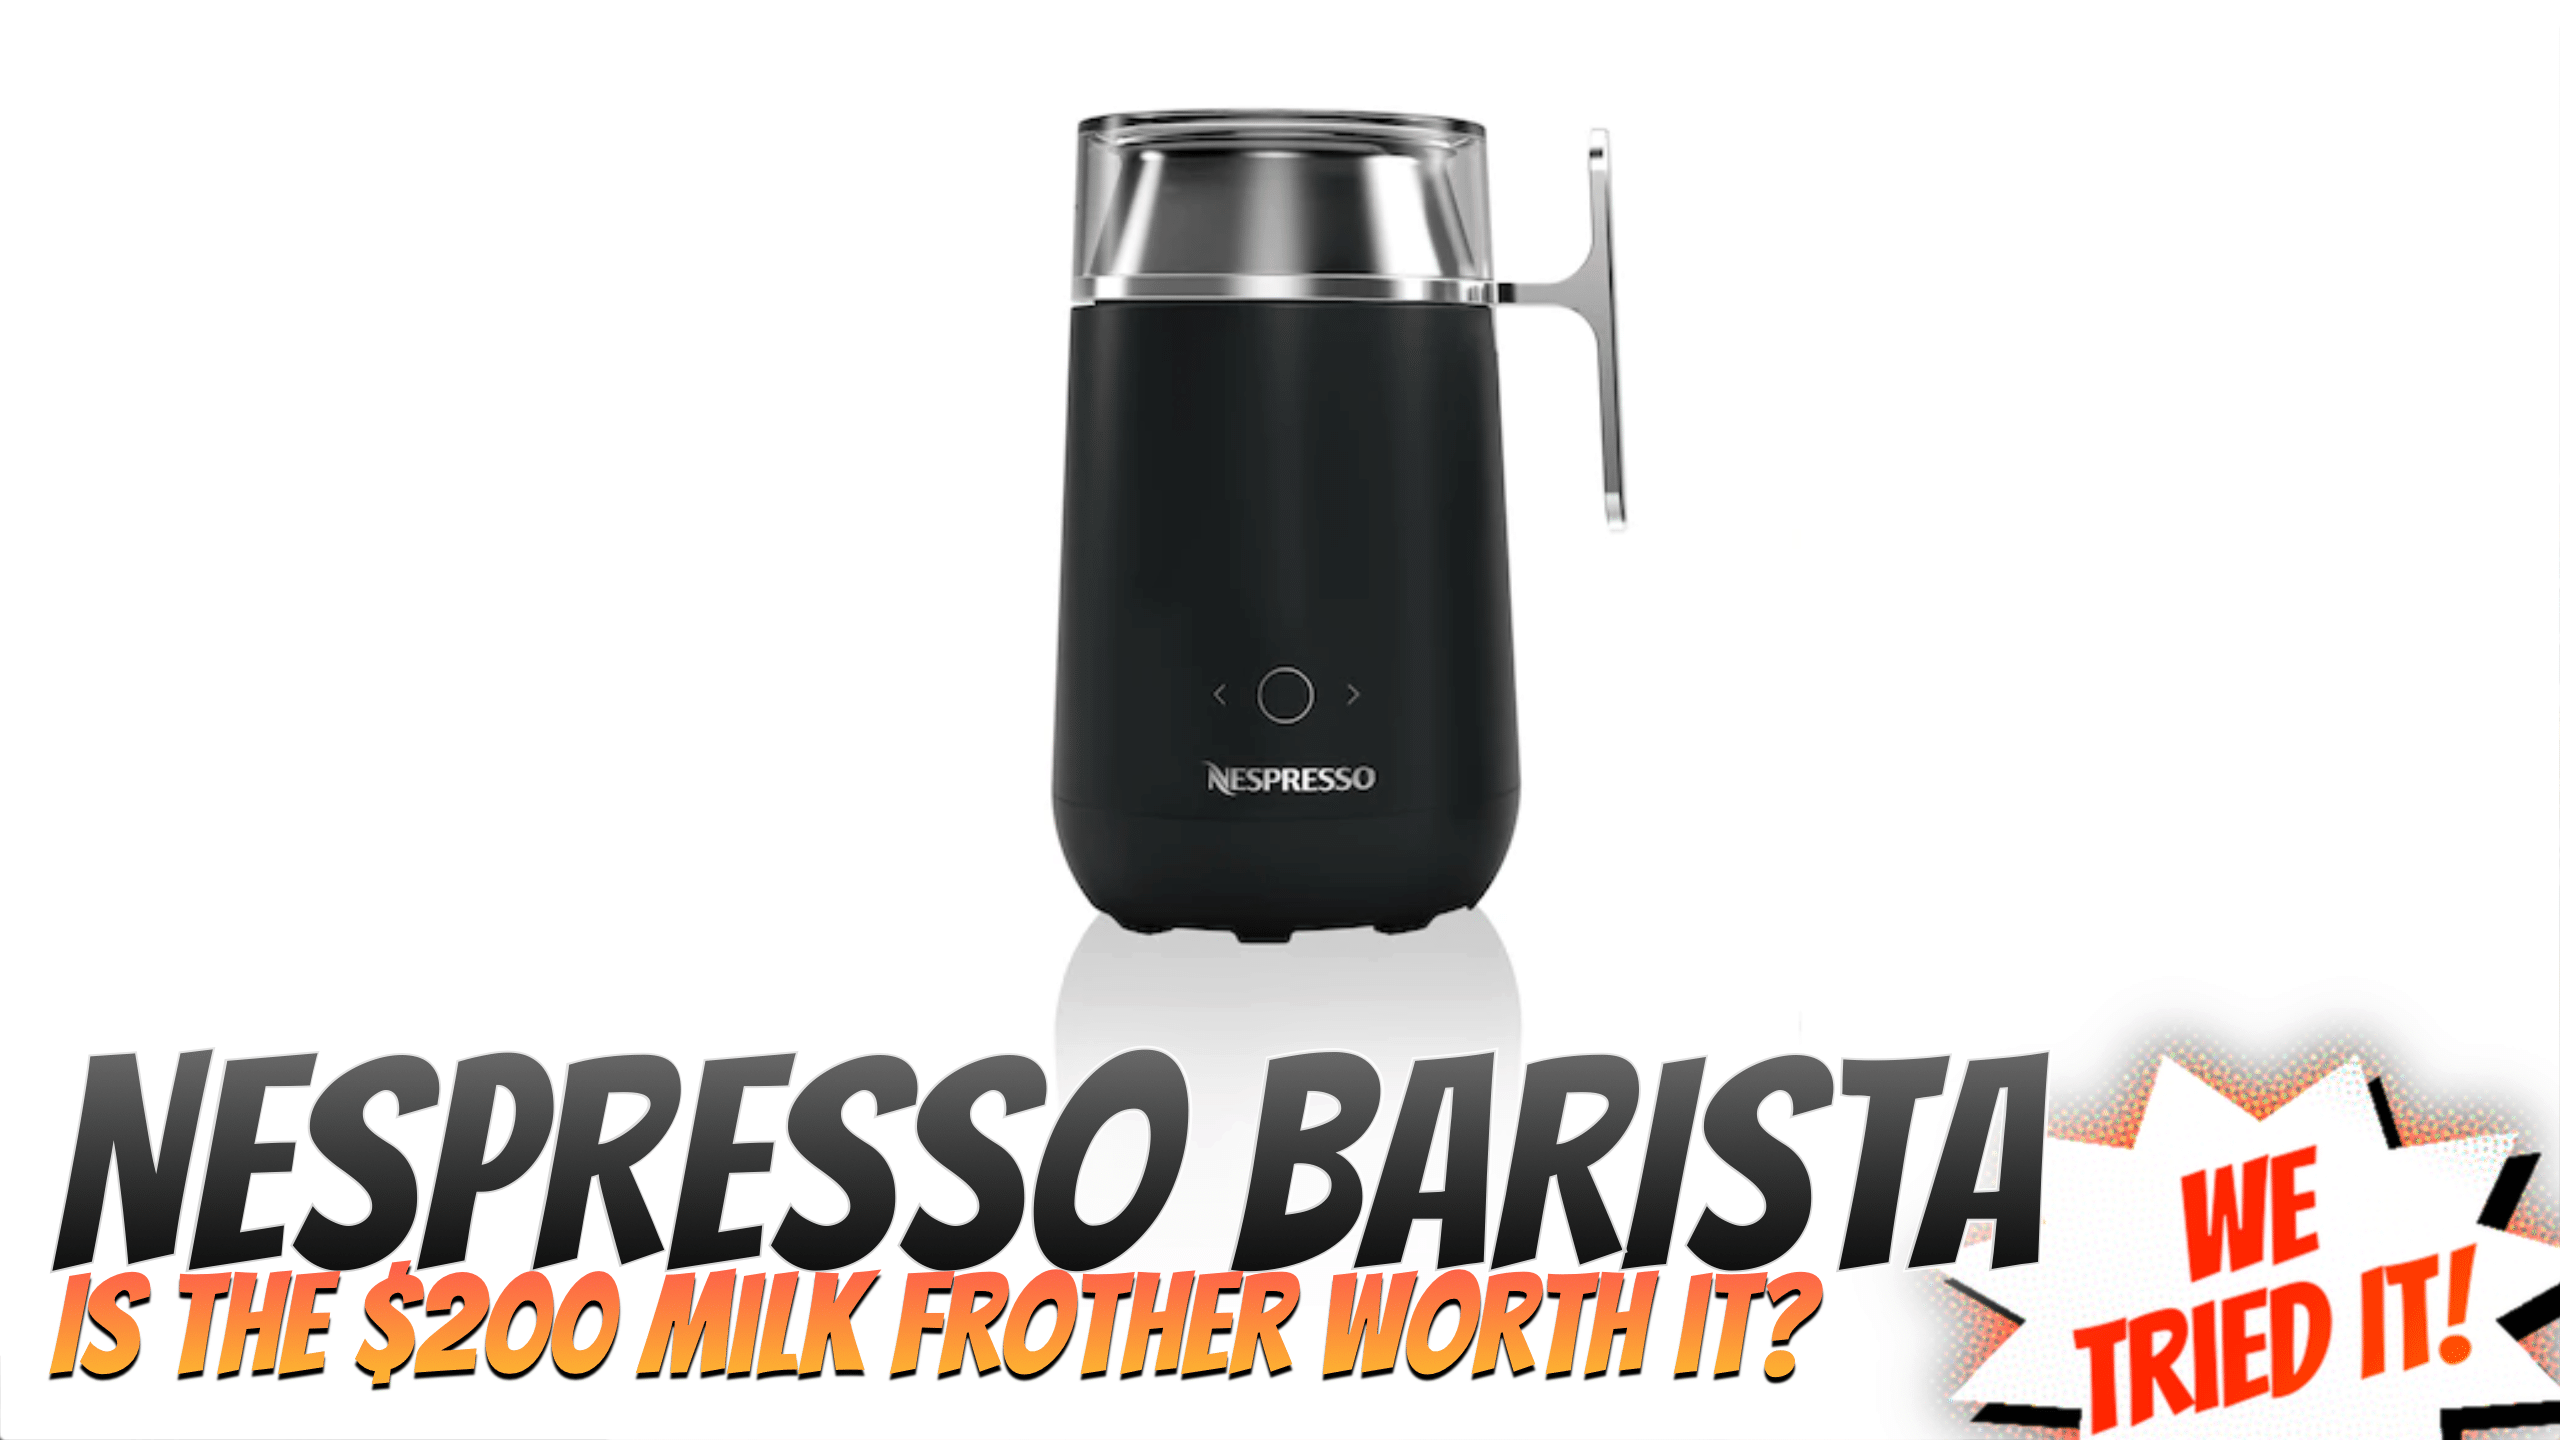 Nespresso Barista Review - The $200 Milk Frother Worth It?